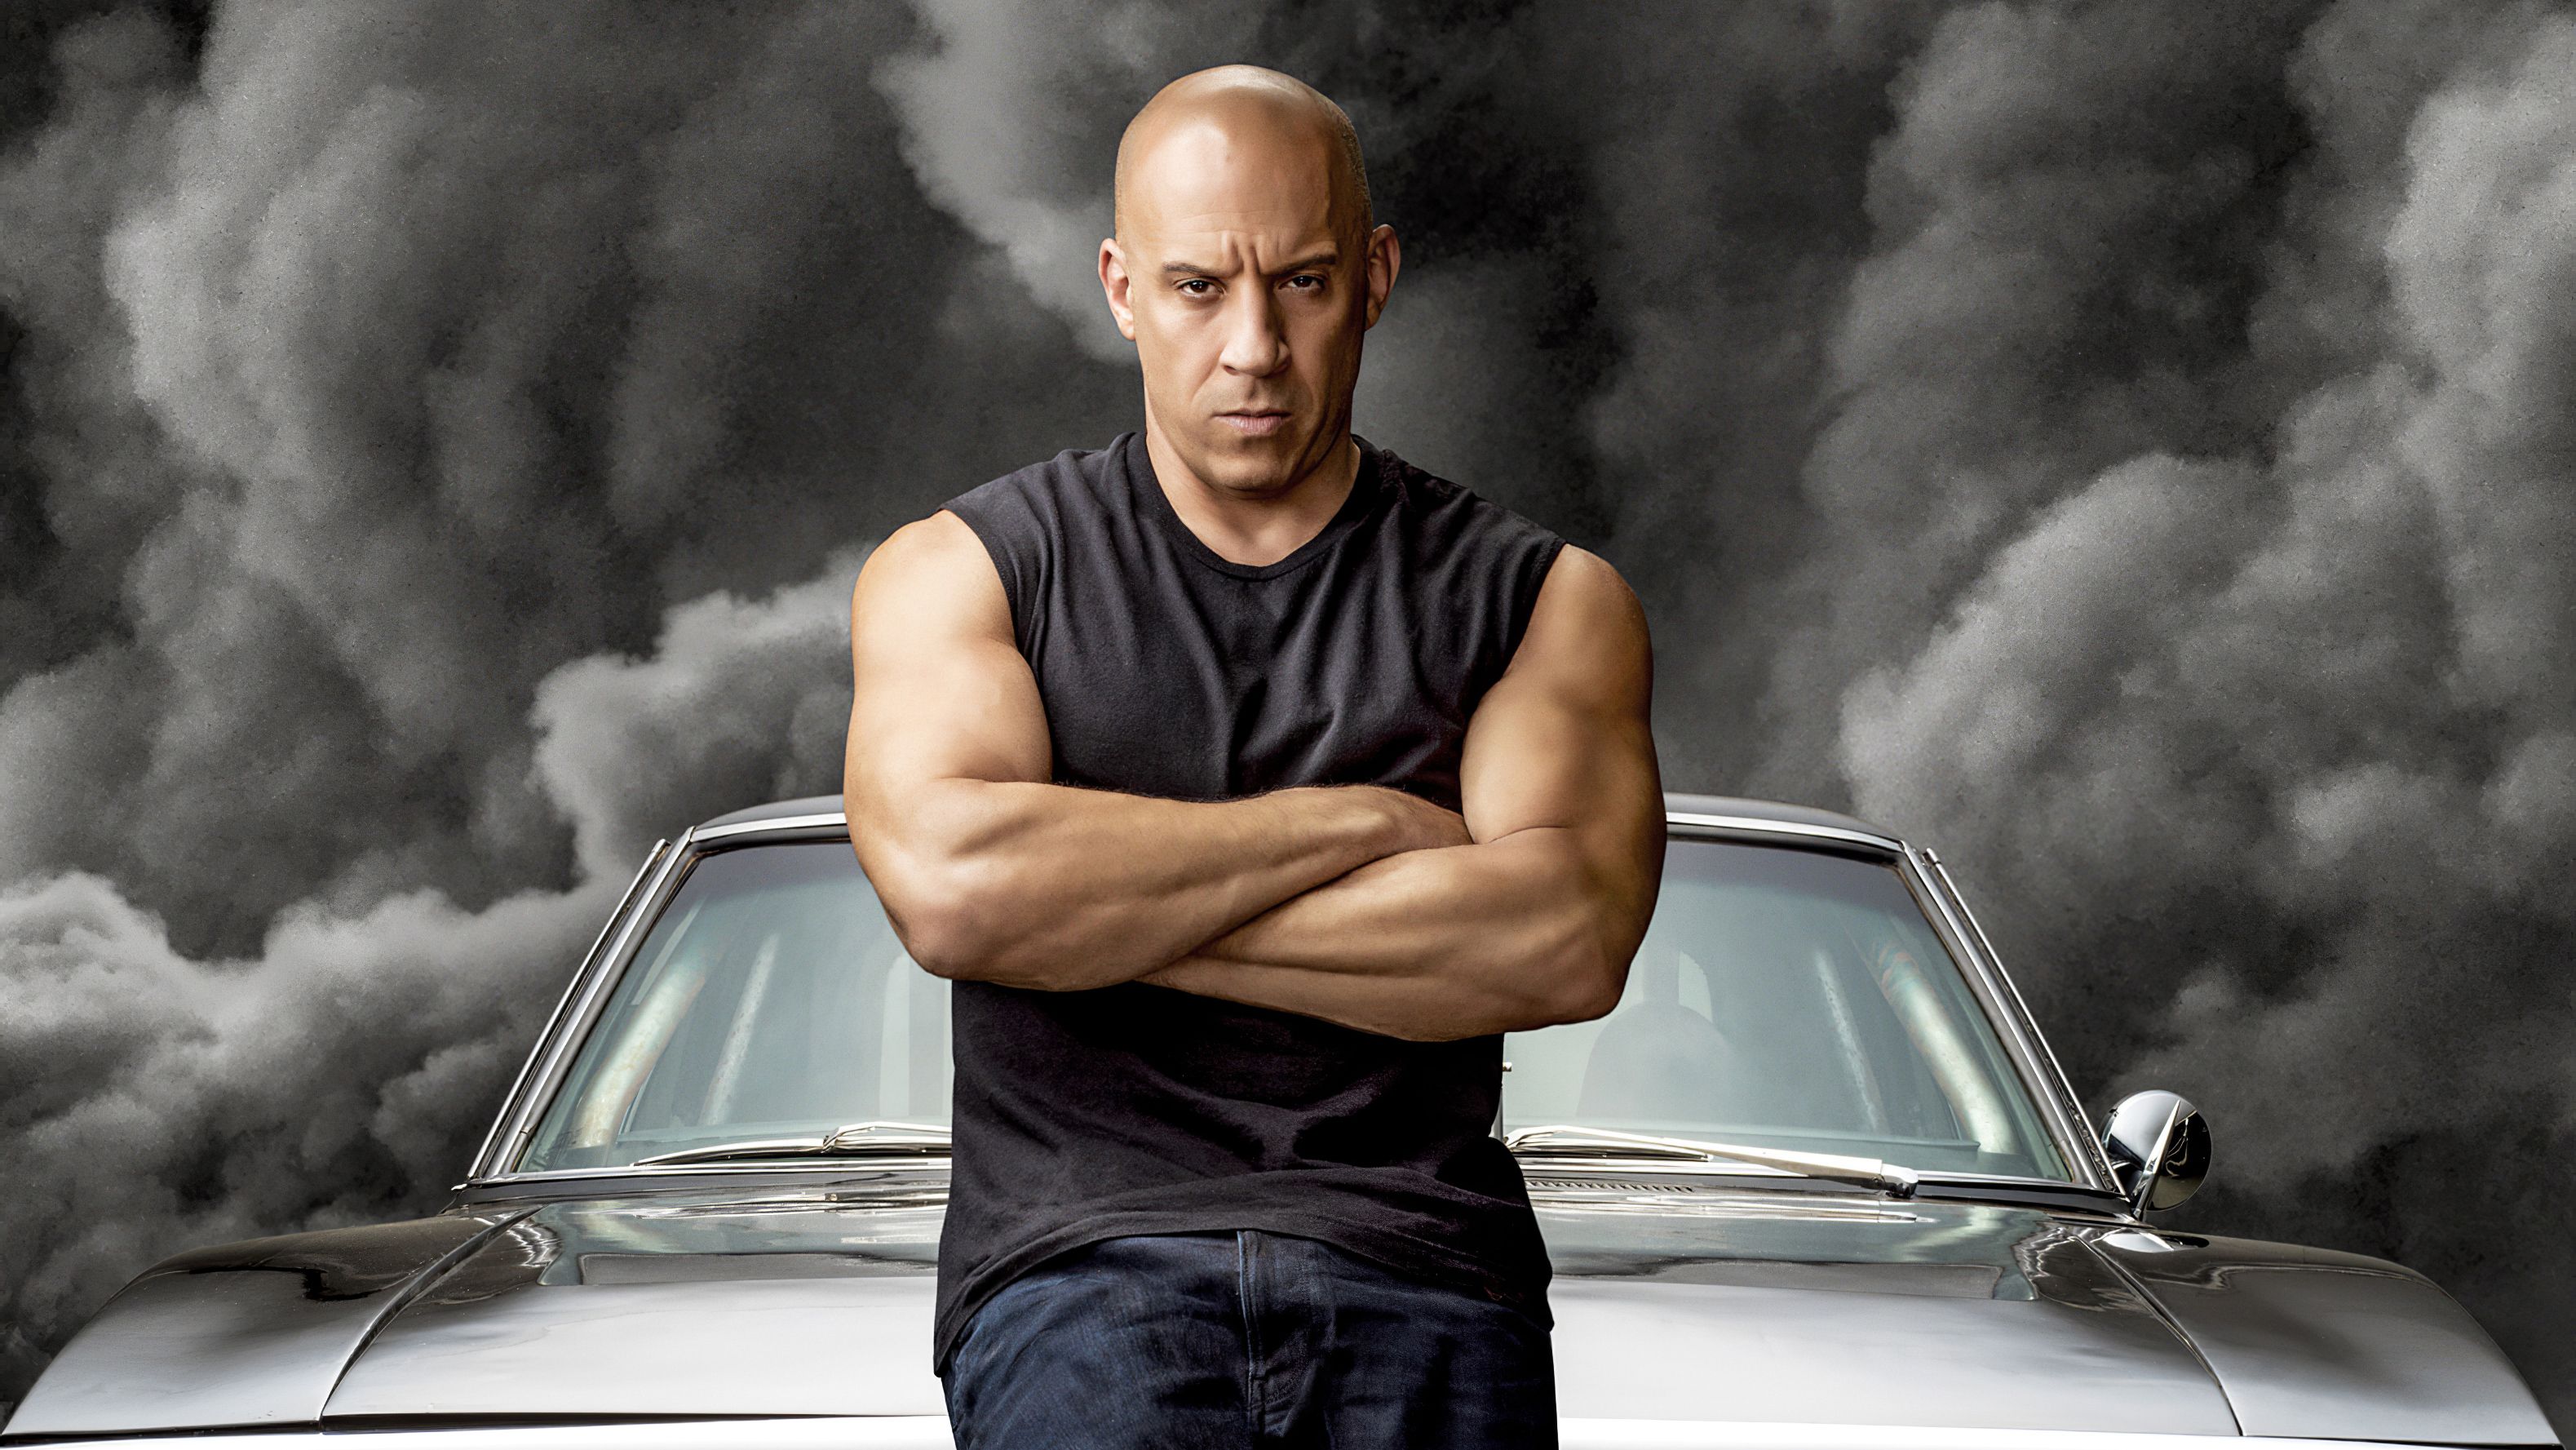 1920x1080 Dominic Toretto In Fast And Furious 9 2020 Movie Laptop Full HD 1...